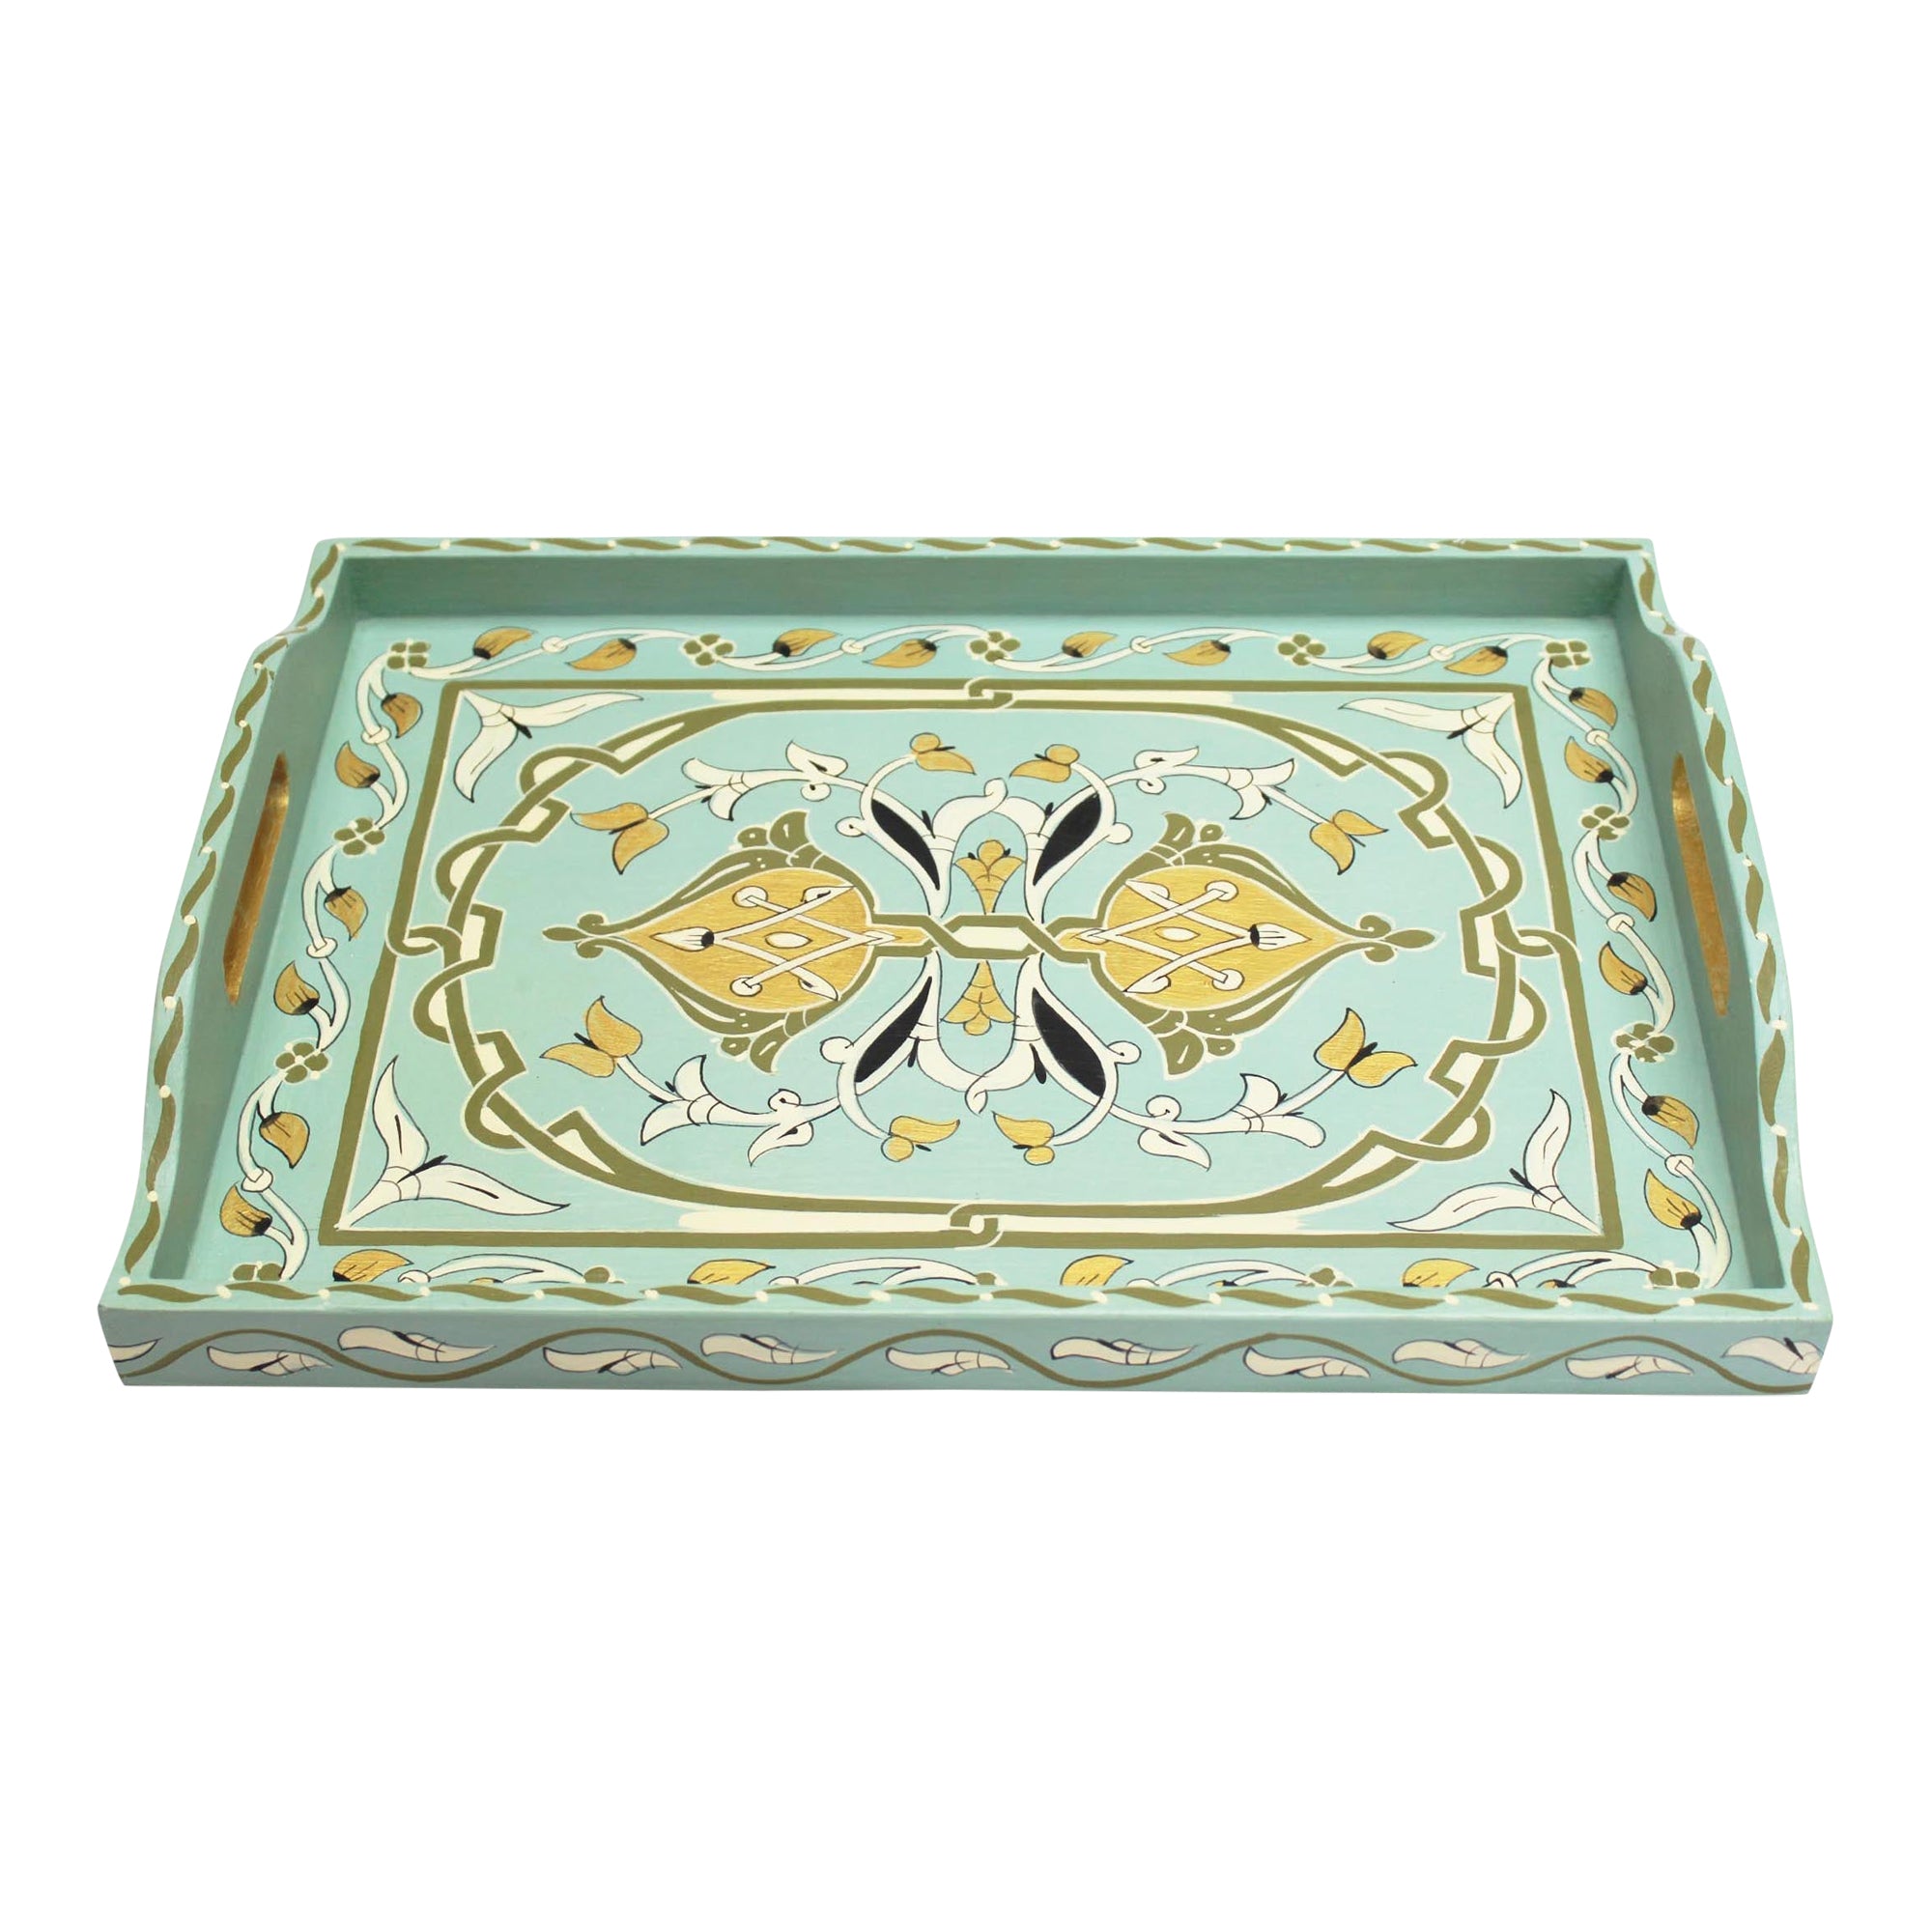 The Blue Sage Majorelle Tray